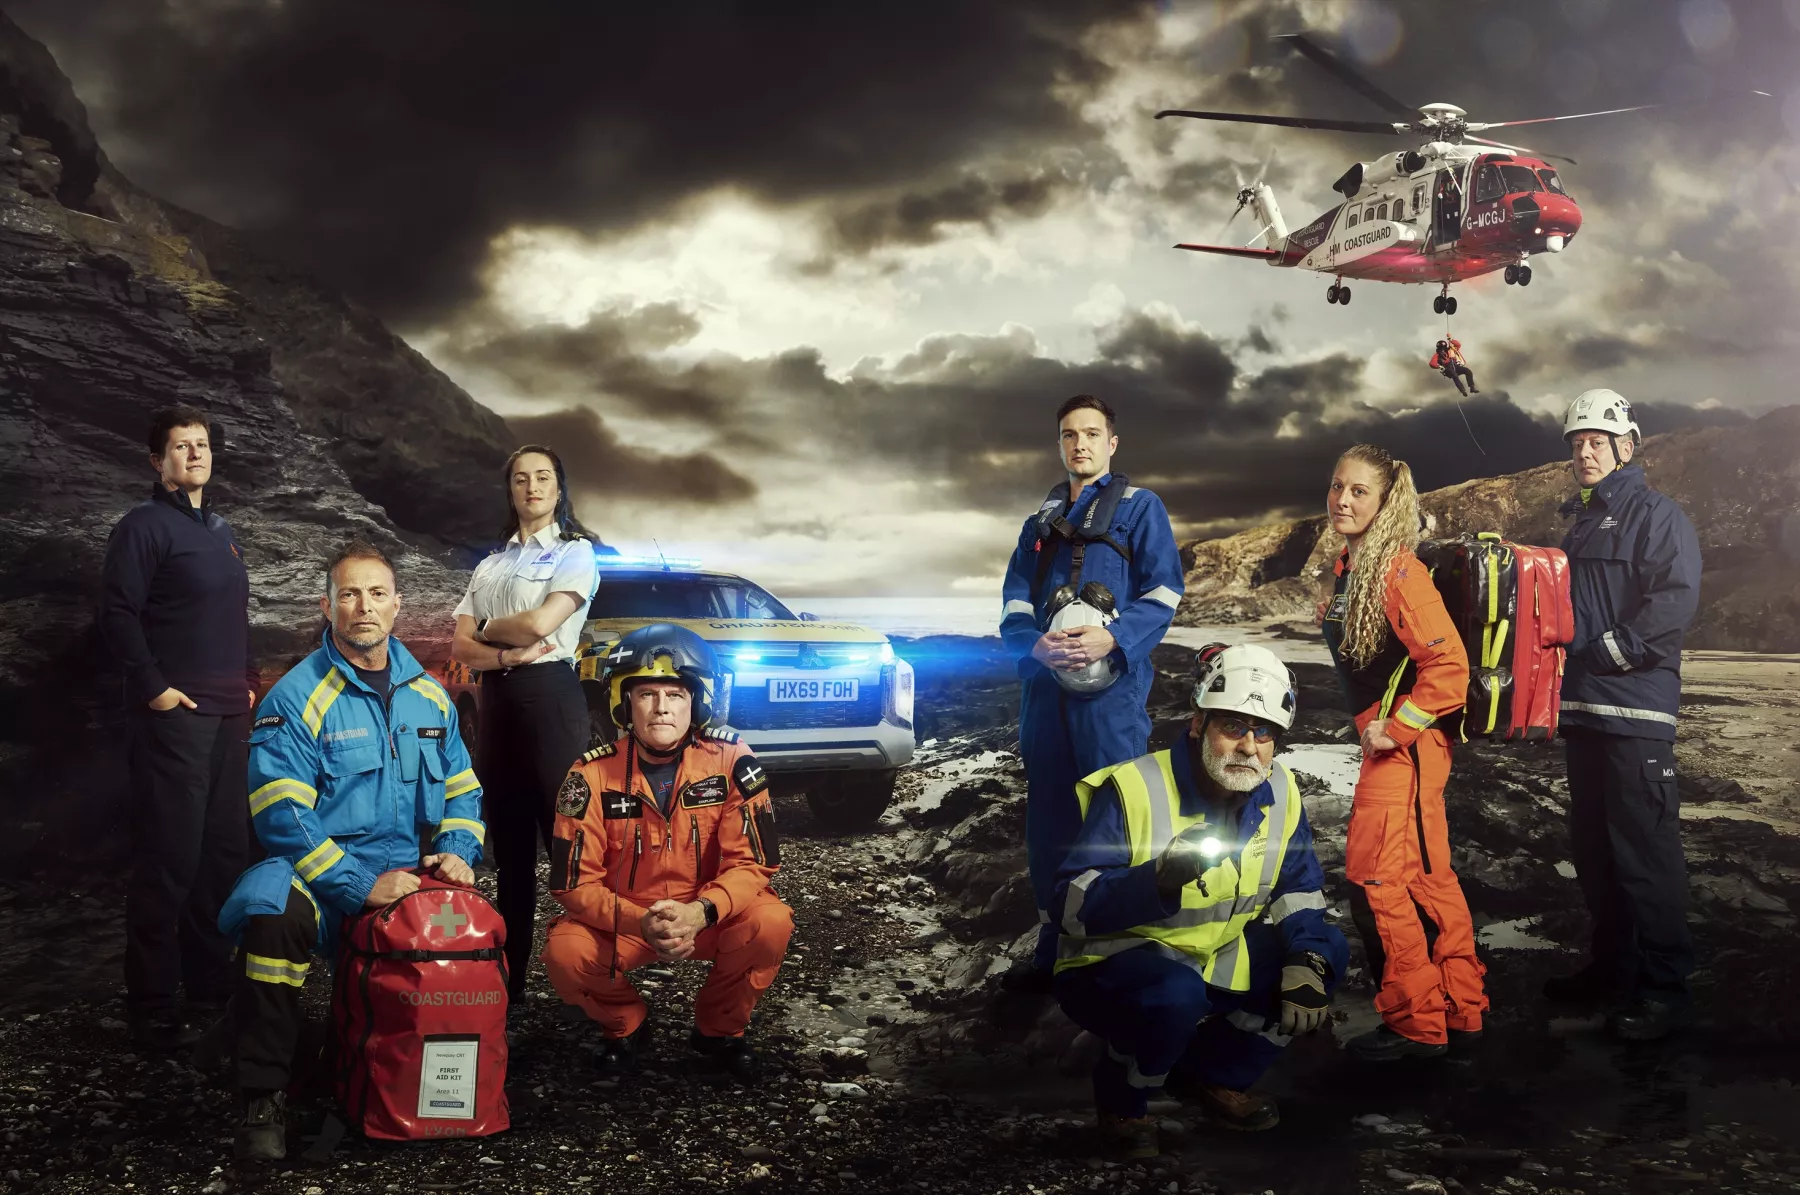 A group of Coastguards in various uniforms stand on a grey, rocky landscape. Above, a Coastguard helicopter is hovering.